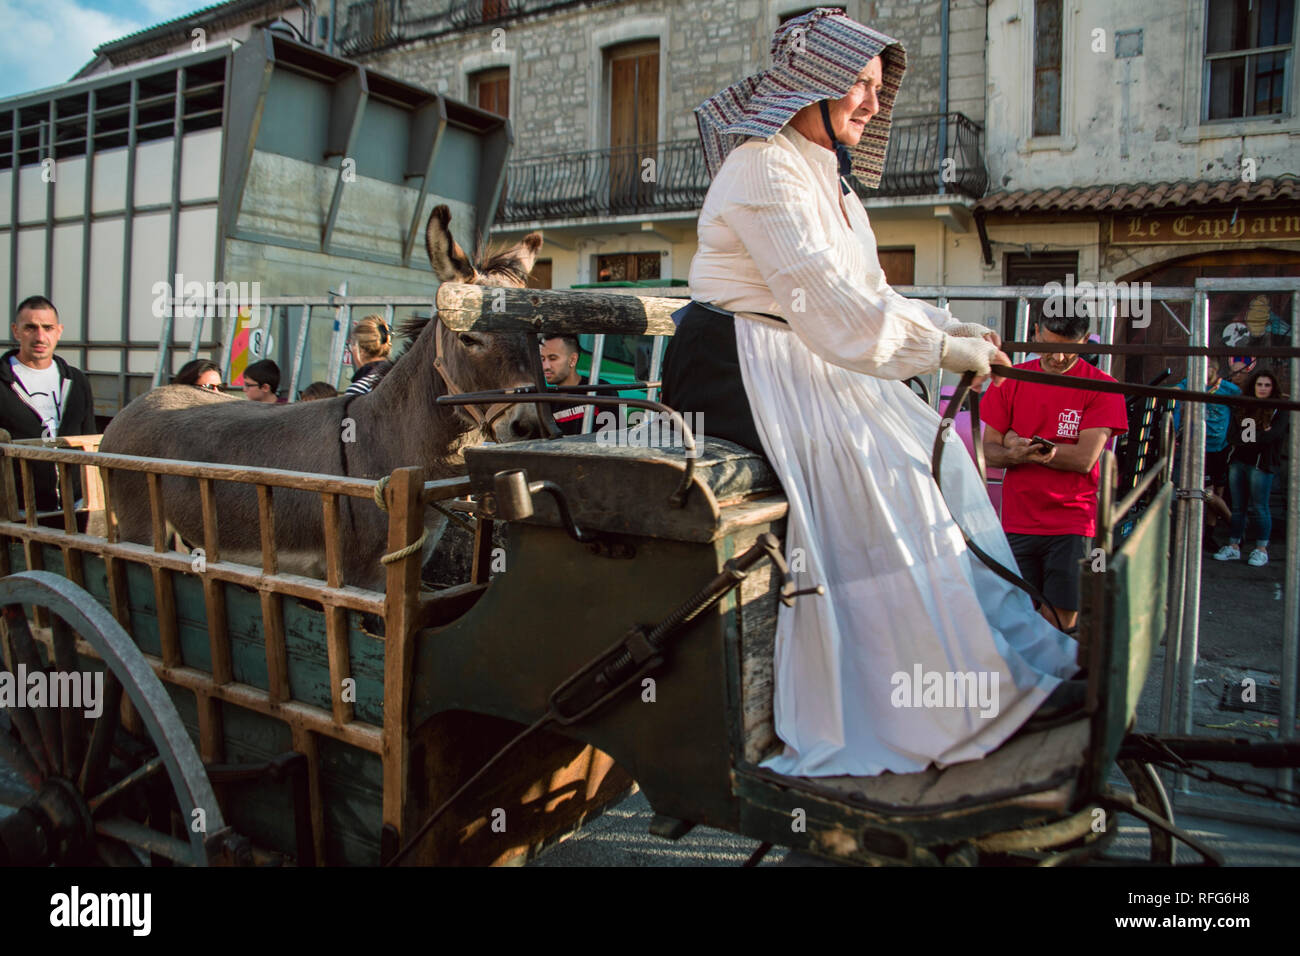 French lady driving horse drawn wagon carrying a mule in the Old School Parade of traditional trades at Annual Fete, Saint Gilles, Gard, France. Stock Photo